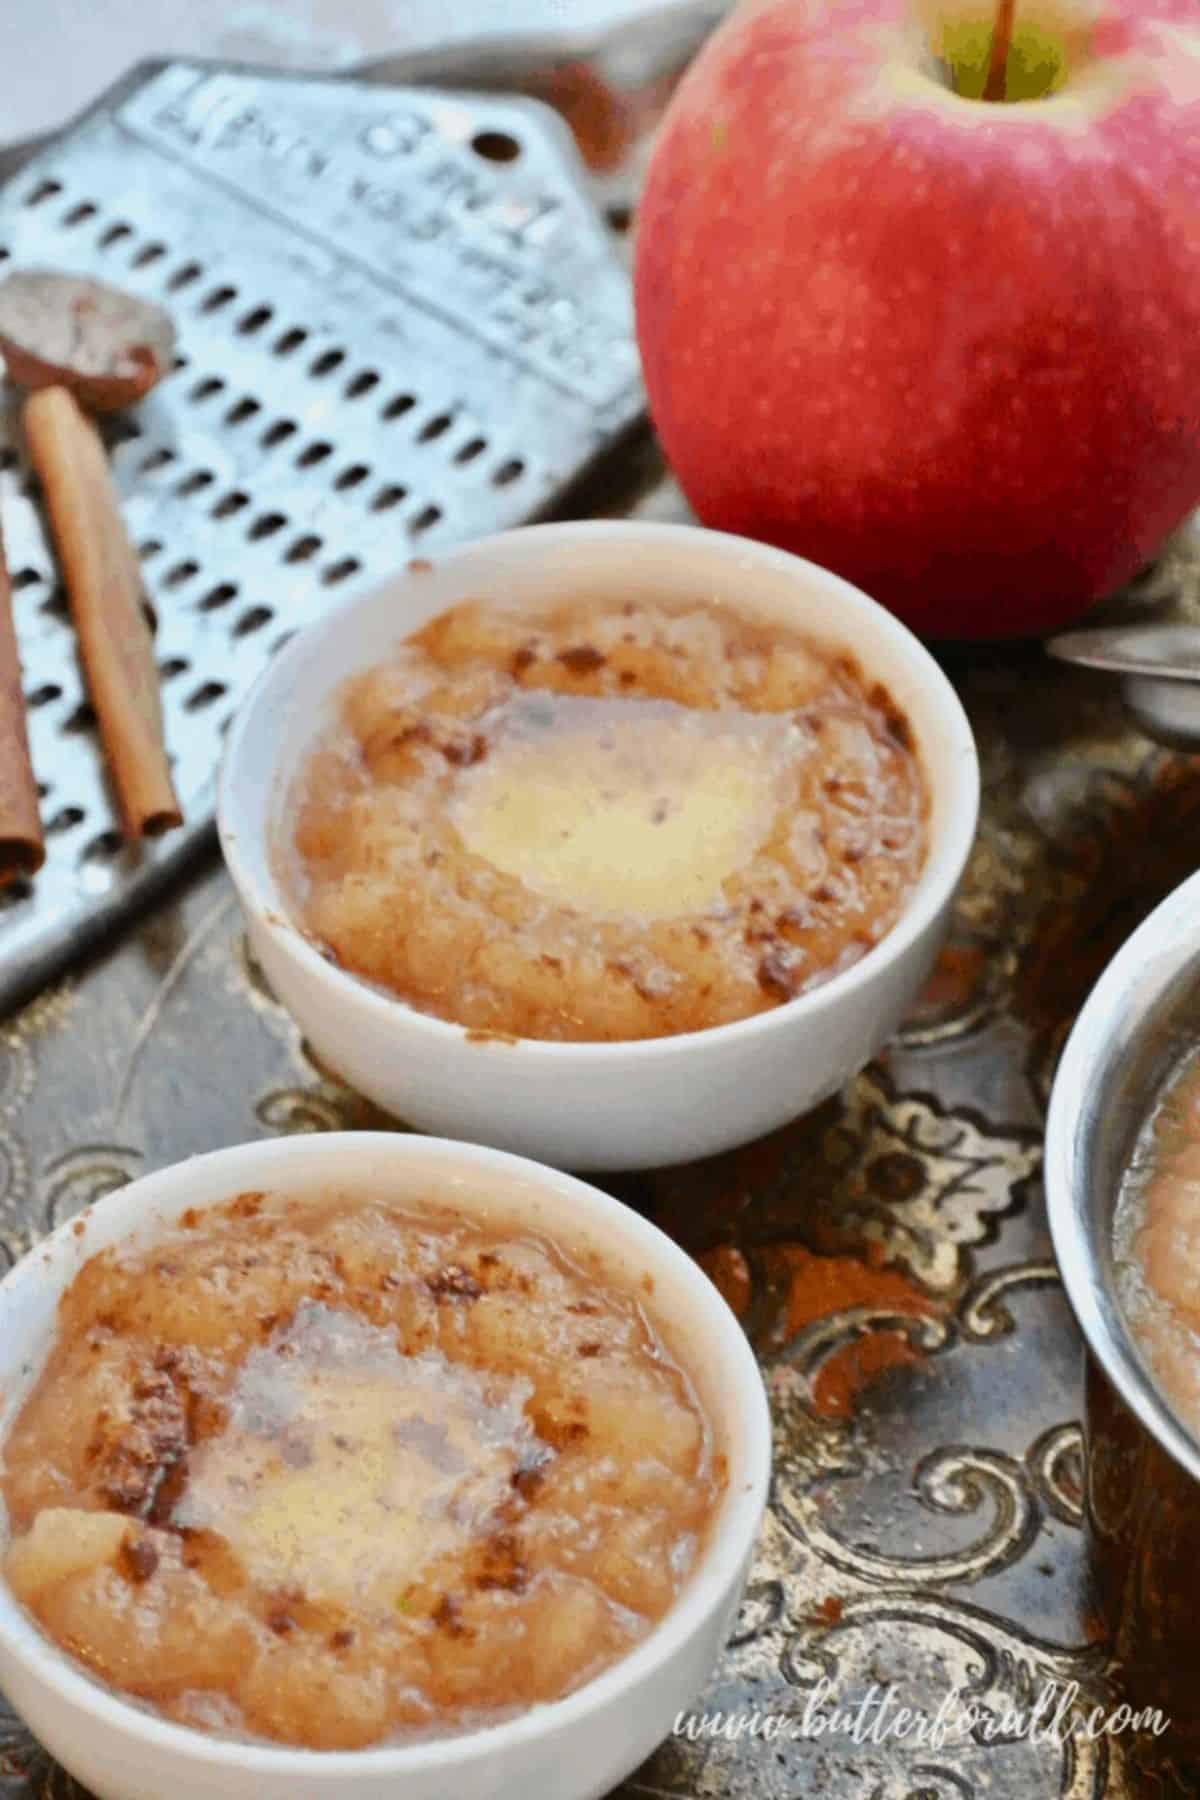 Hot Buttered Apple Sauce With Cinnamon and Nutmeg in two white bowls.